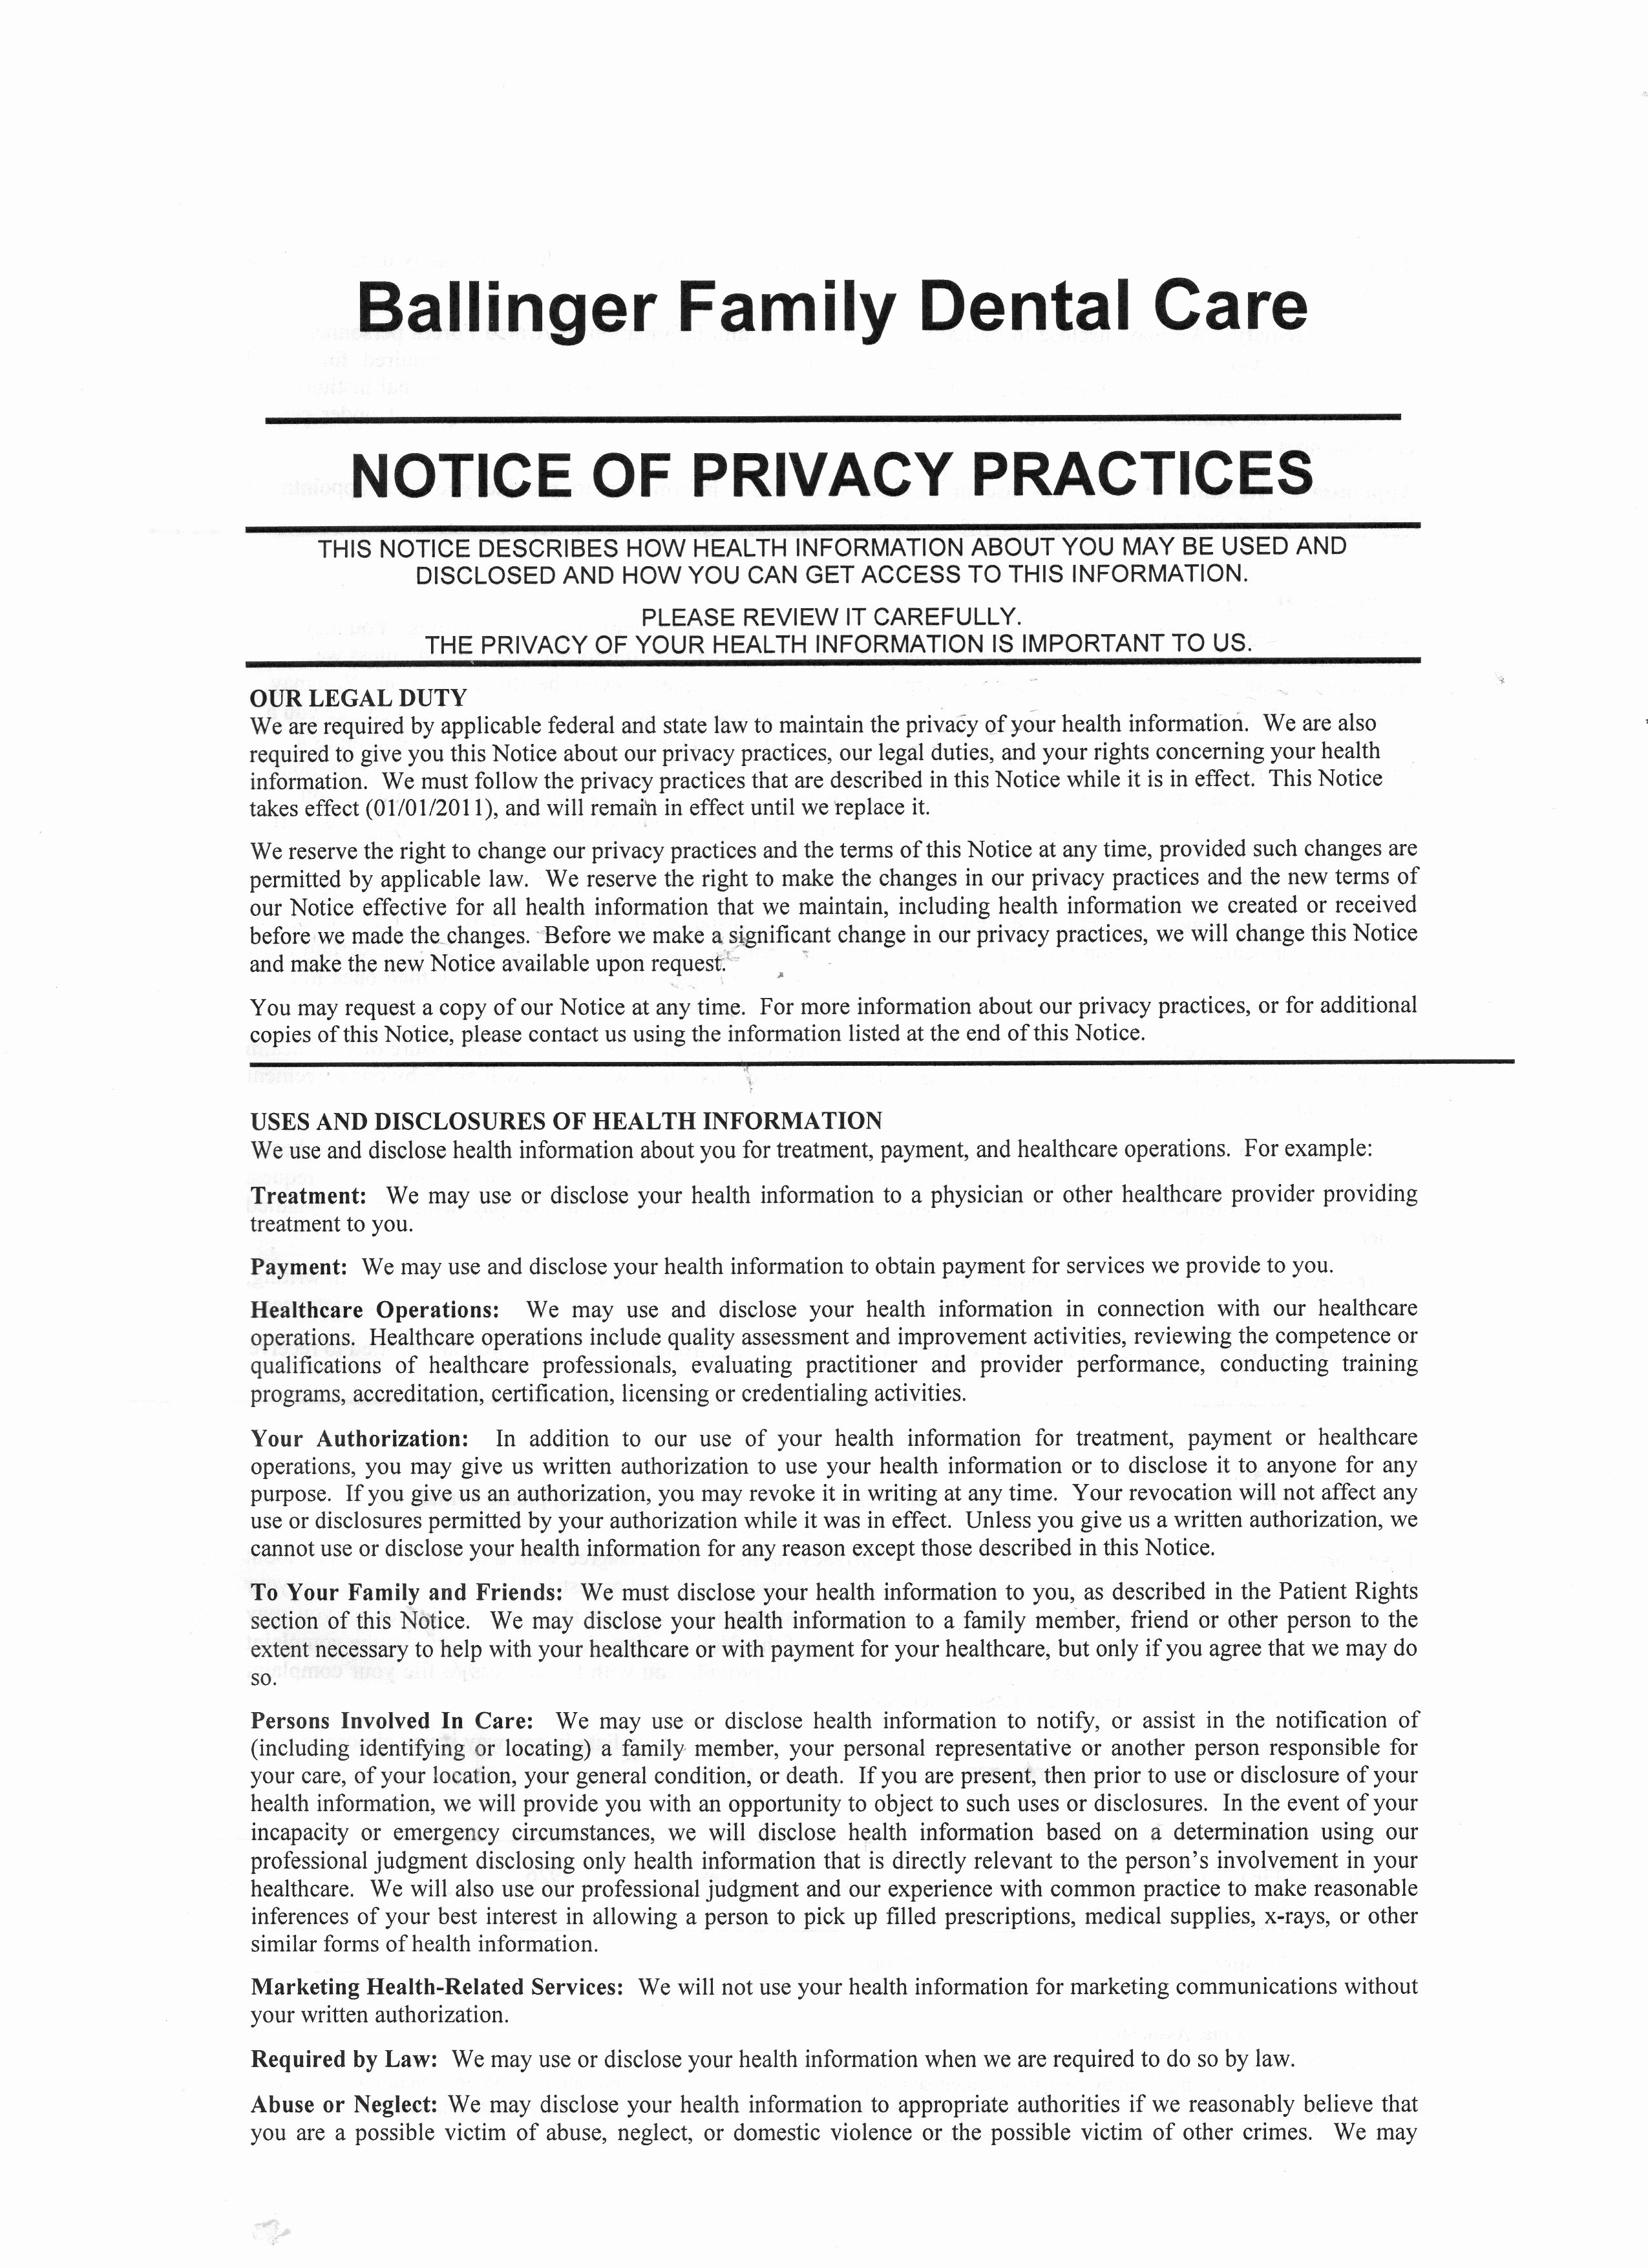 Dental Patient forms Template Beautiful Ballinger Family Dental Care Privacy Policy